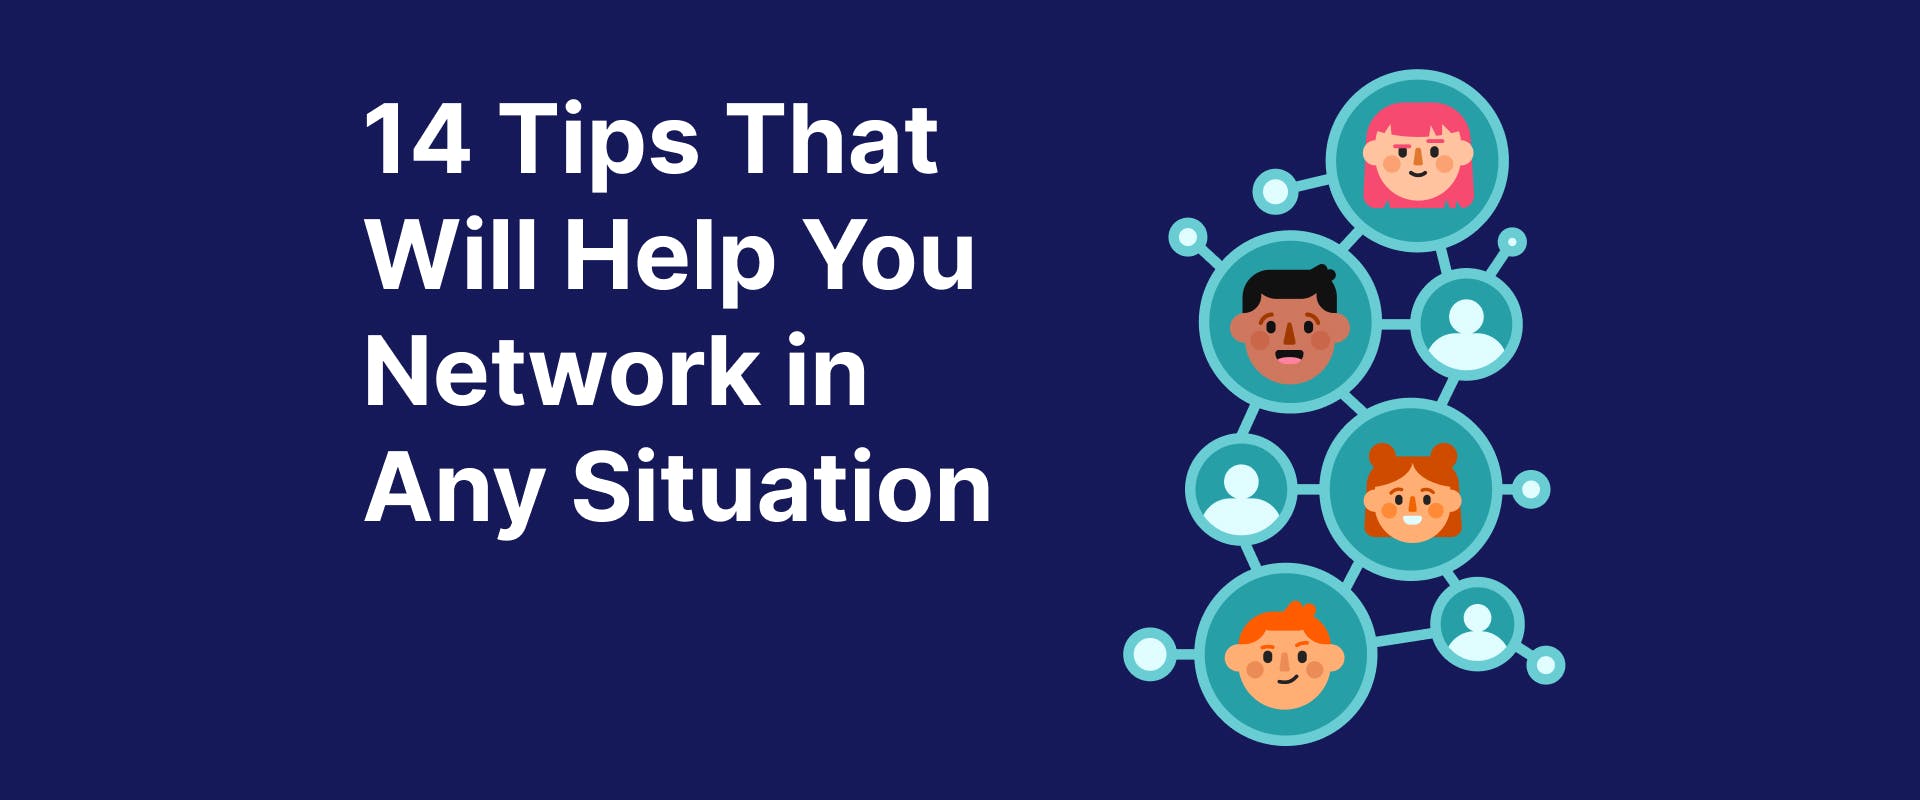 14 Tips That Will Help You Network in Any Situation - Headway App